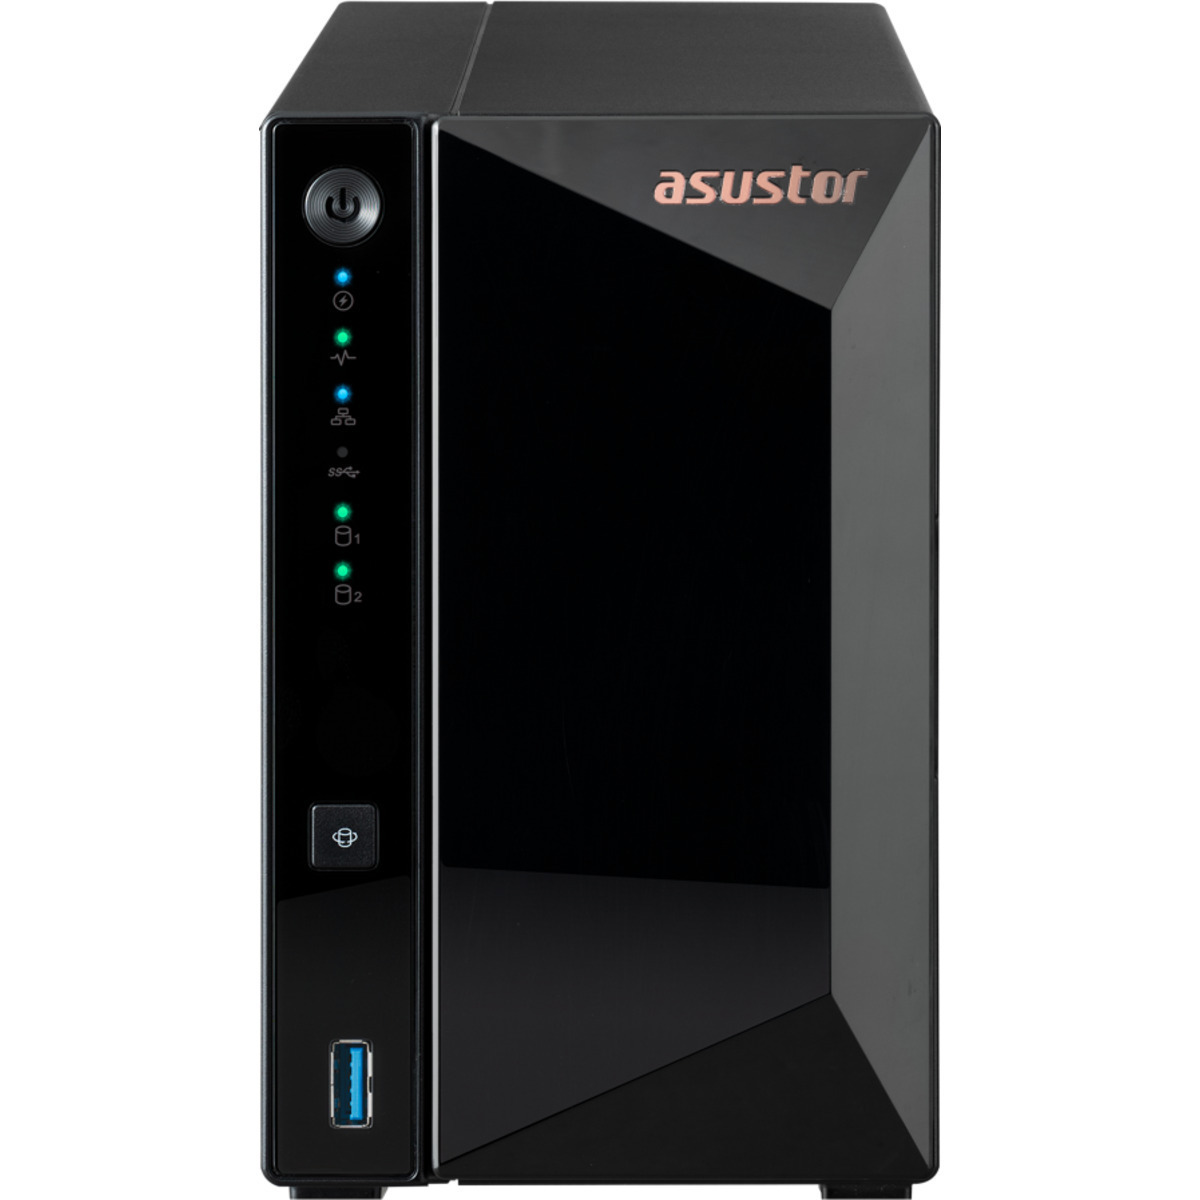 ASUSTOR DRIVESTOR 2 Pro AS3302T 32tb 2-Bay Desktop Personal / Basic Home / Small Office NAS - Network Attached Storage Device 2x16tb Seagate IronWolf Pro ST16000NT001 3.5 7200rpm SATA 6Gb/s HDD NAS Class Drives Installed - Burn-In Tested - ON SALE DRIVESTOR 2 Pro AS3302T